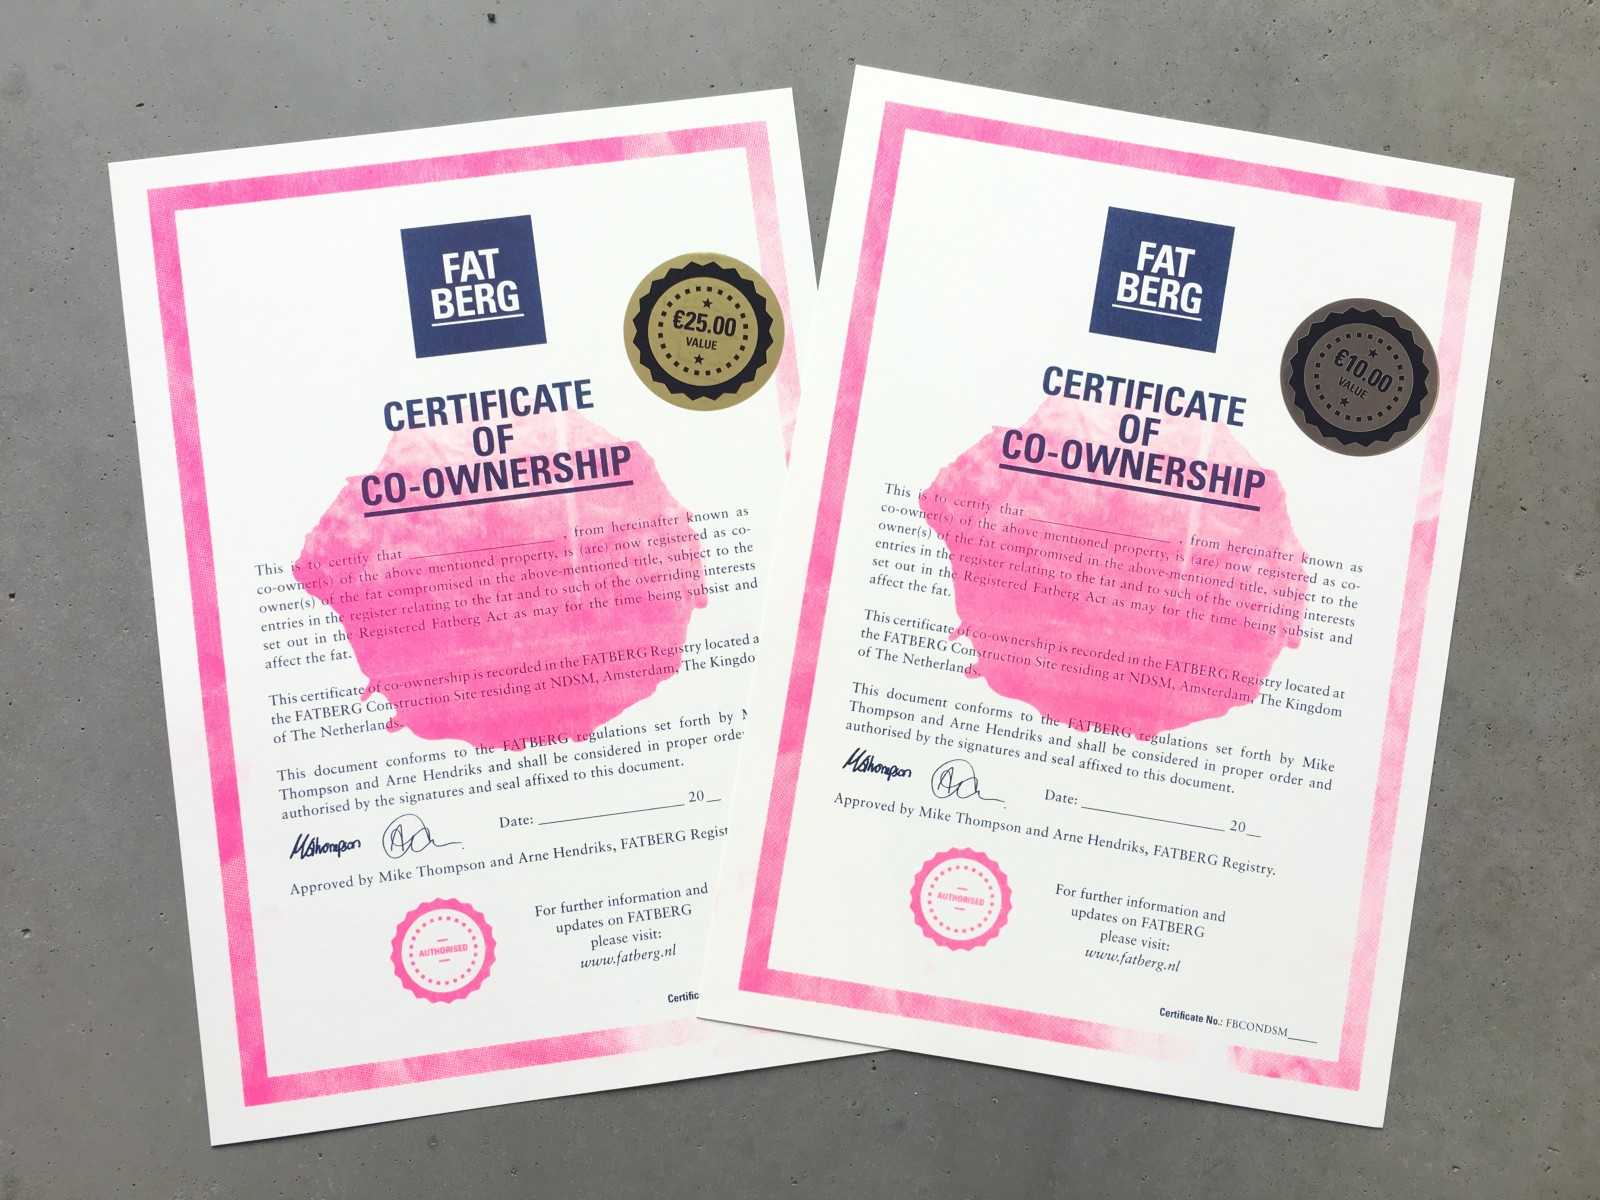 Certificate of co-ownership Fatberg